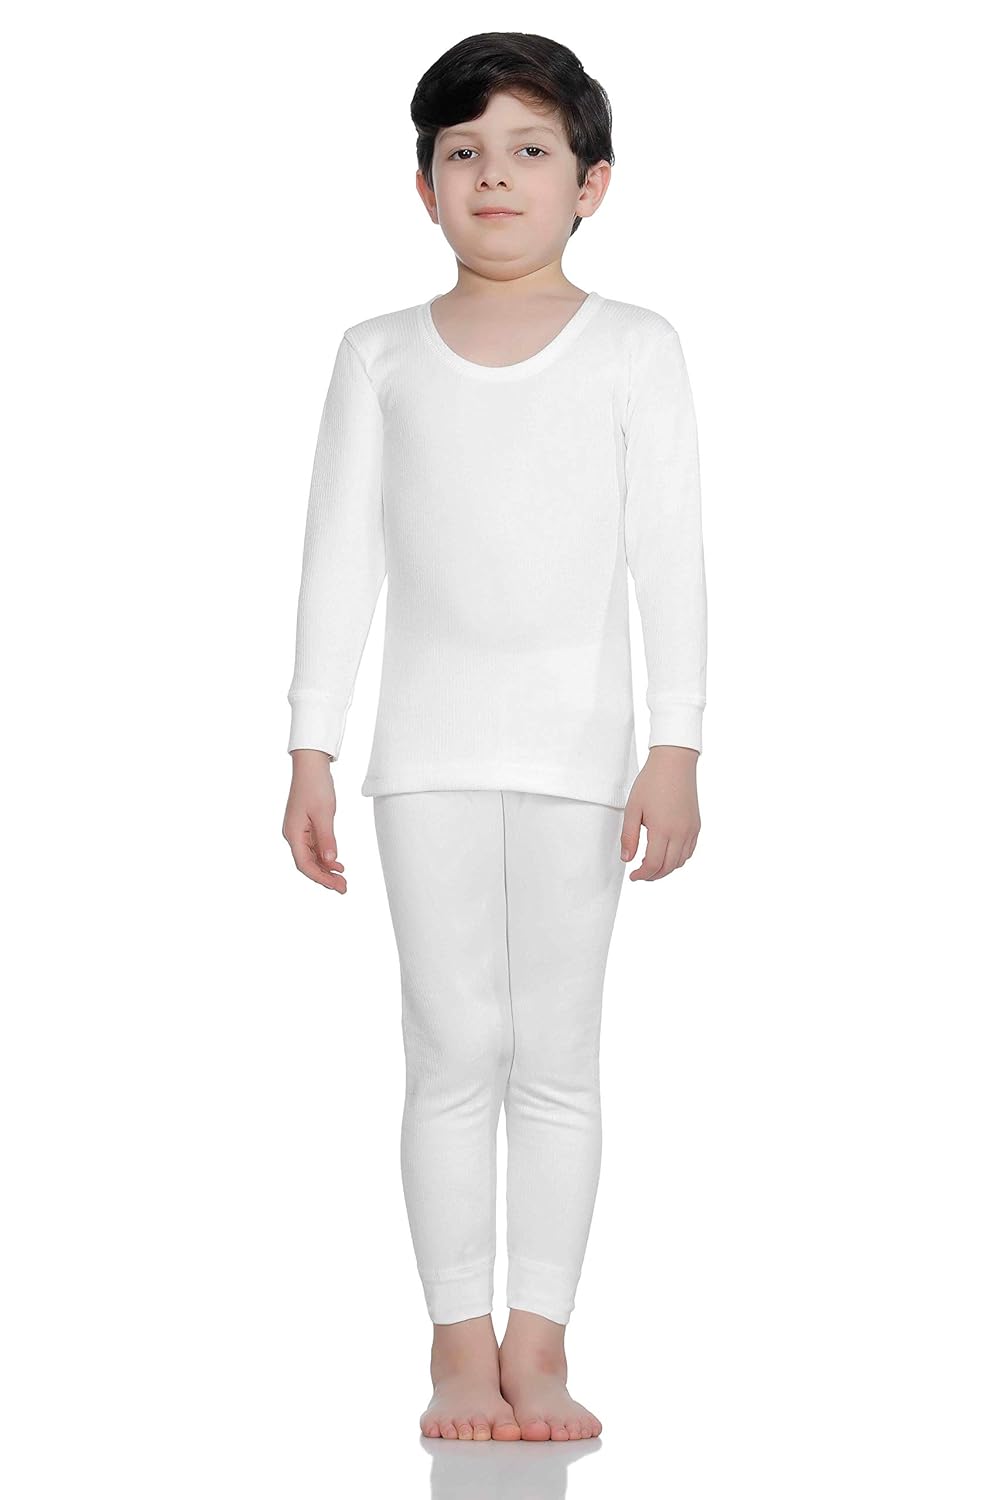 Jockey Unisex Kid's Super Combed Cotton Rich Thermal Long John (Pant) with Stay Warm and Stay Fresh Treatment - KT01 - ShopIMO